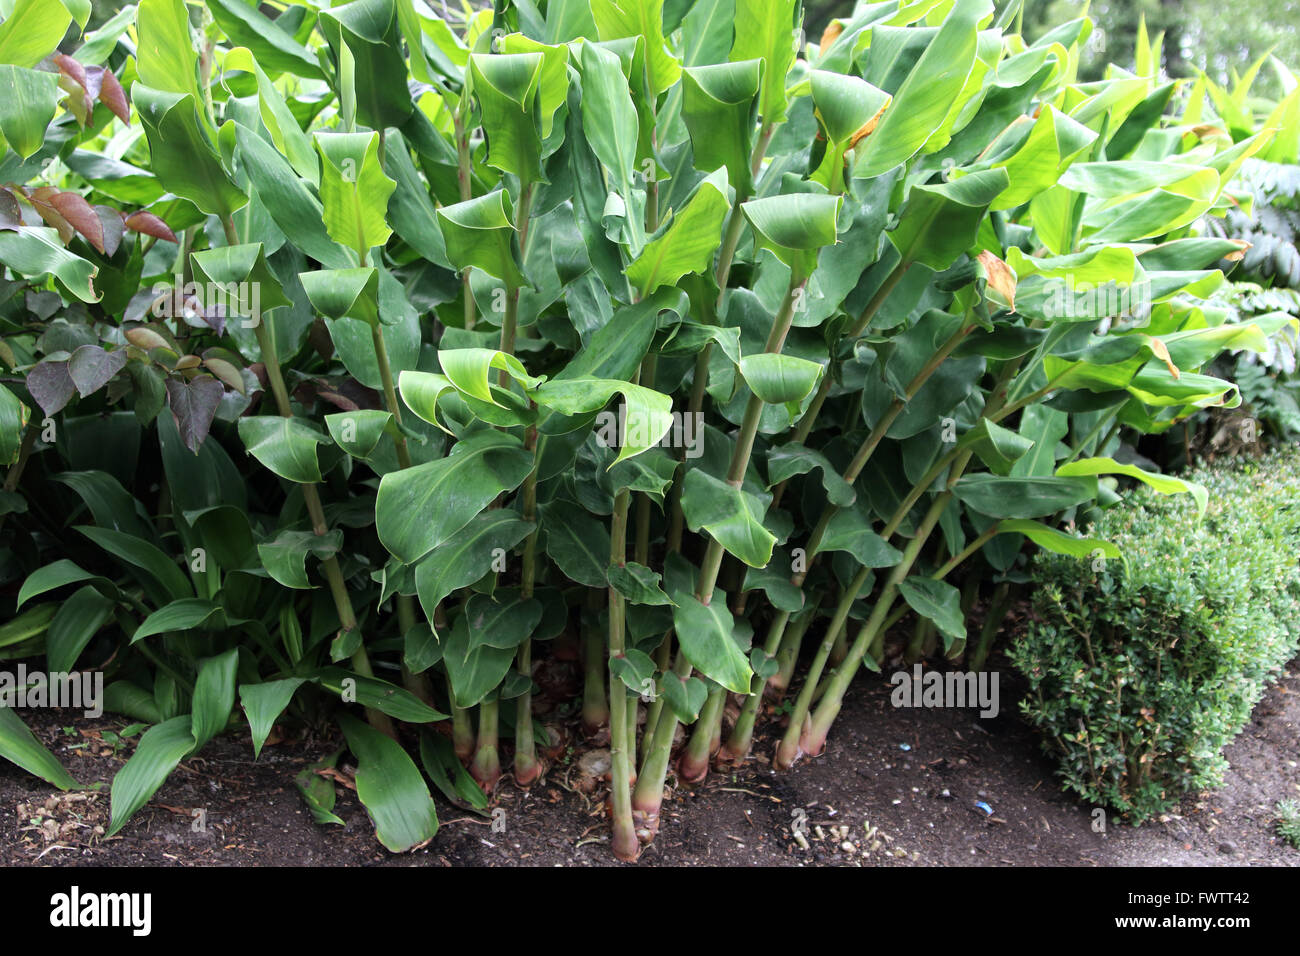 Healthy looking Ornamental ginger plants in the ground Stock Photo